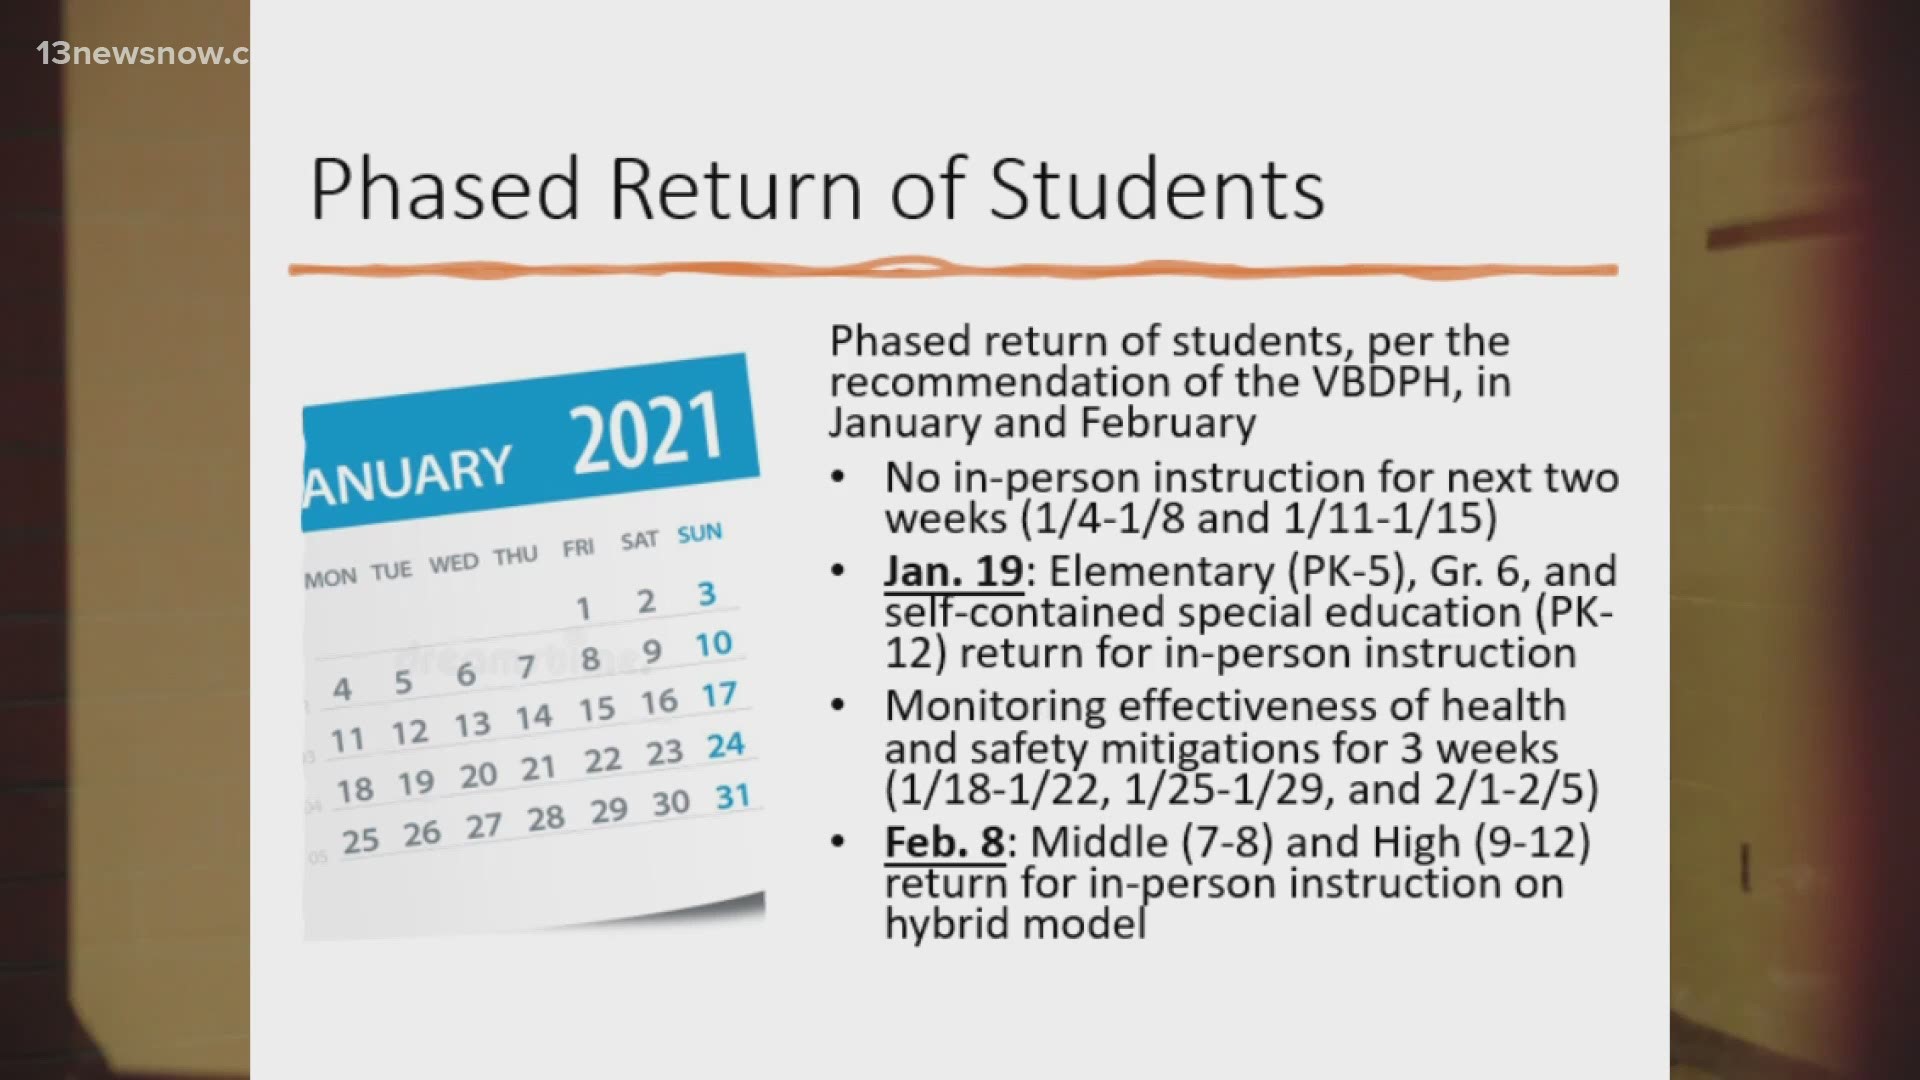 Under the plan, students in grades pre-K through 6th grade and select special education classes would be the first to return, beginning on January 19.